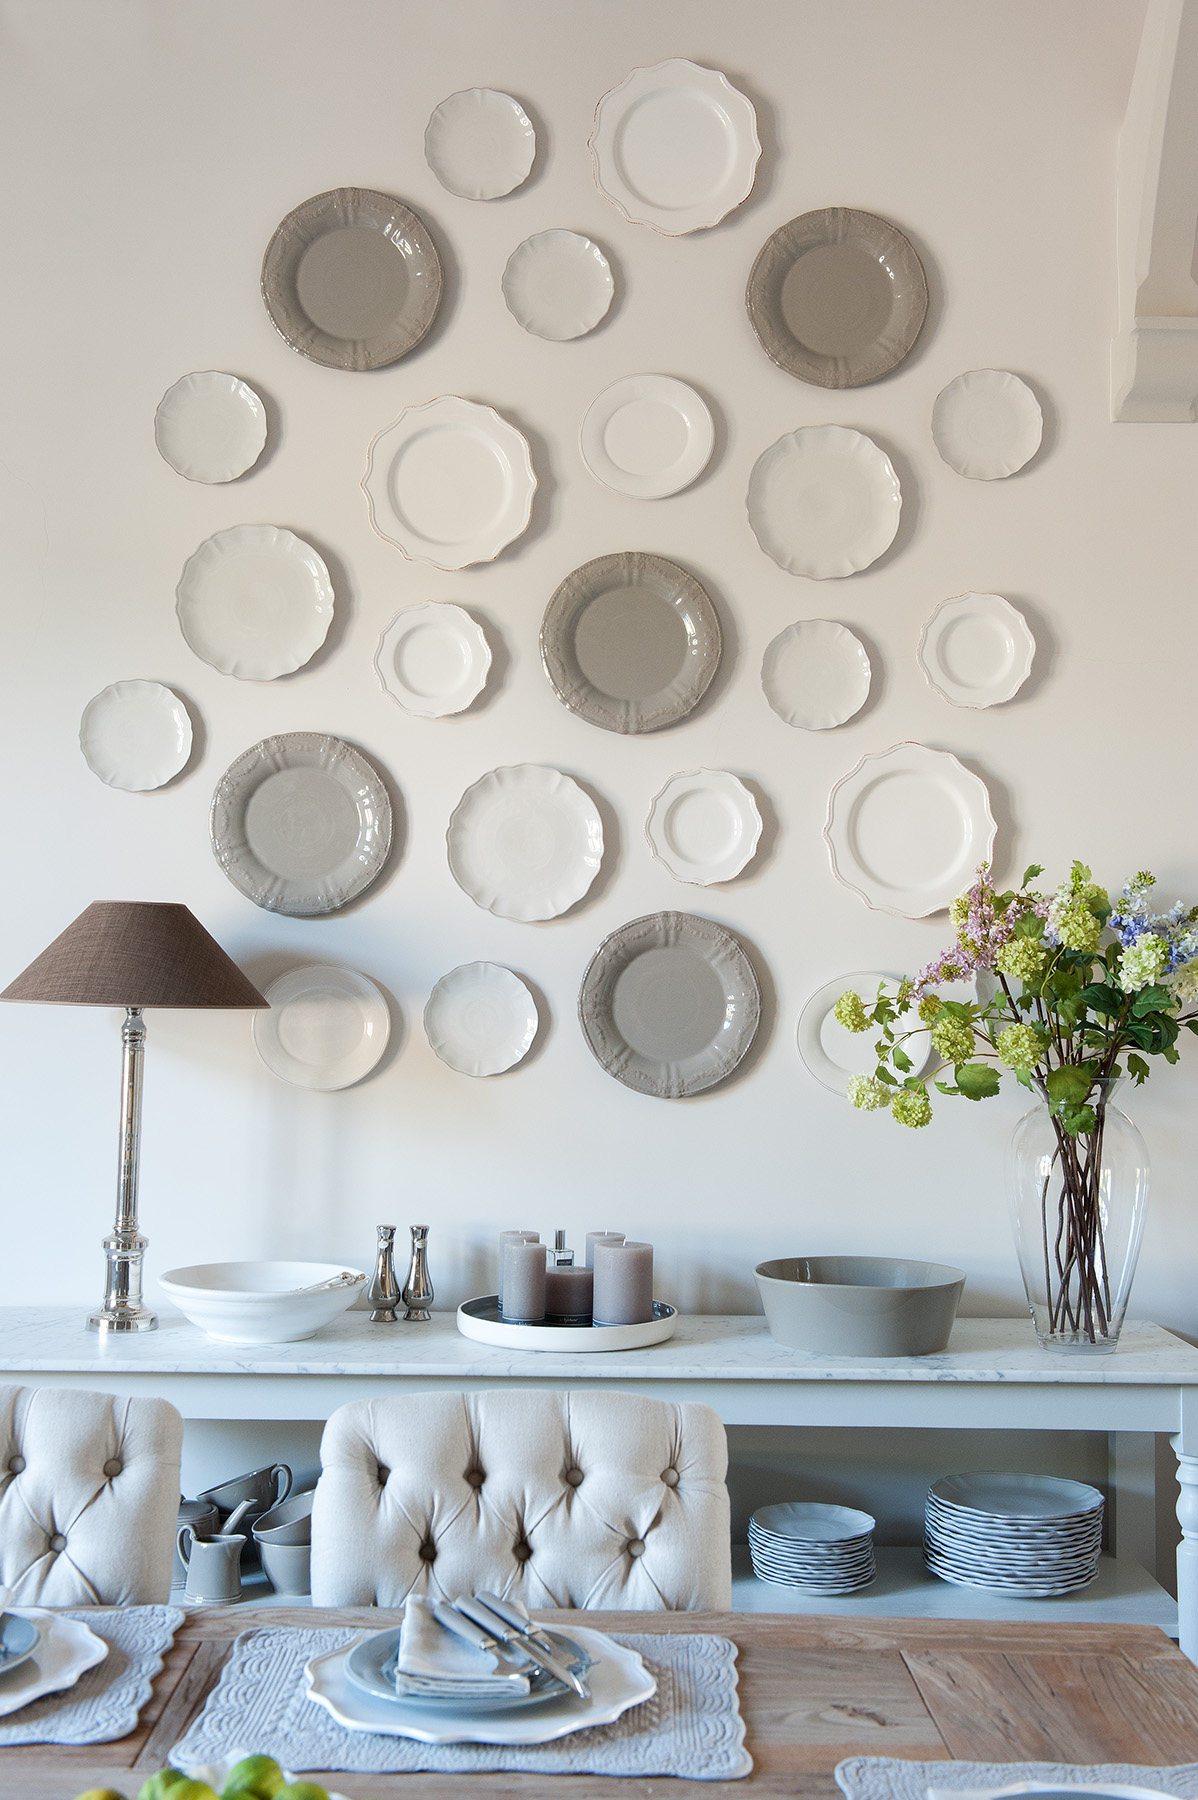 How to hang plates on a wall – an expert guide | Homes & Gardens